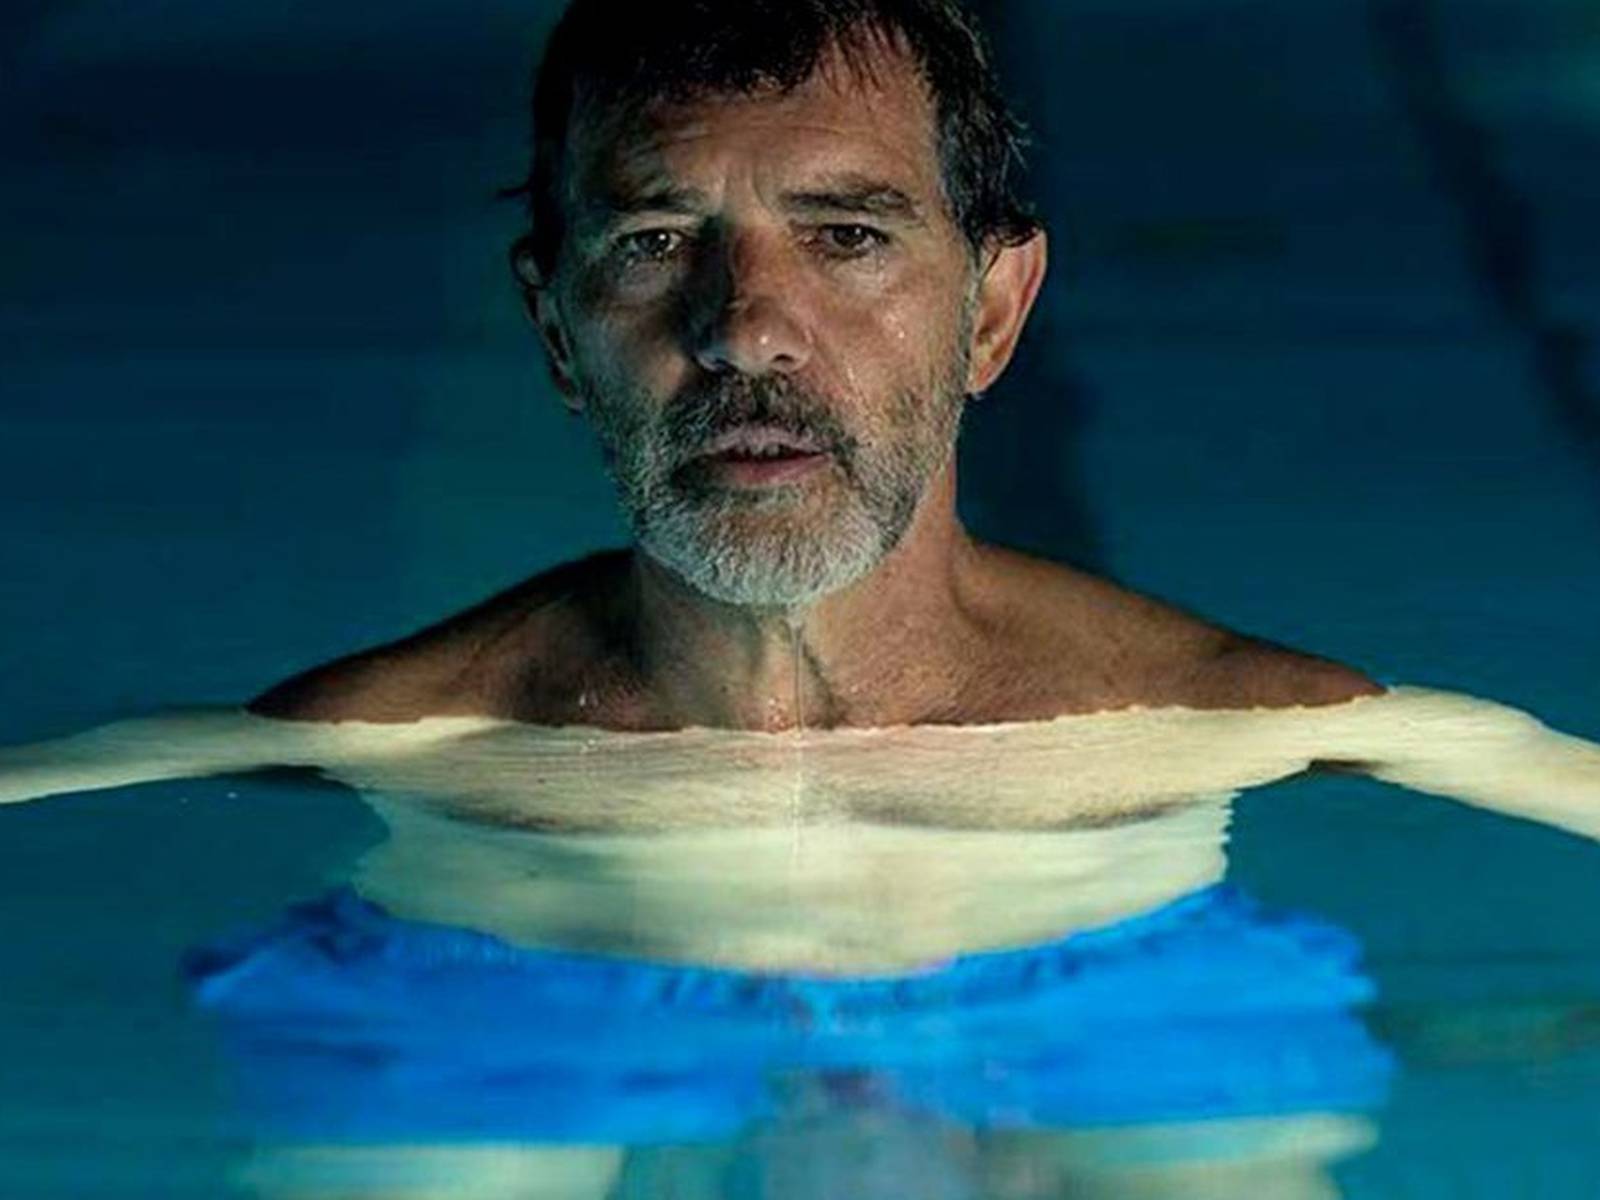 Download Antonio Banderas in a scene from his iconic role in